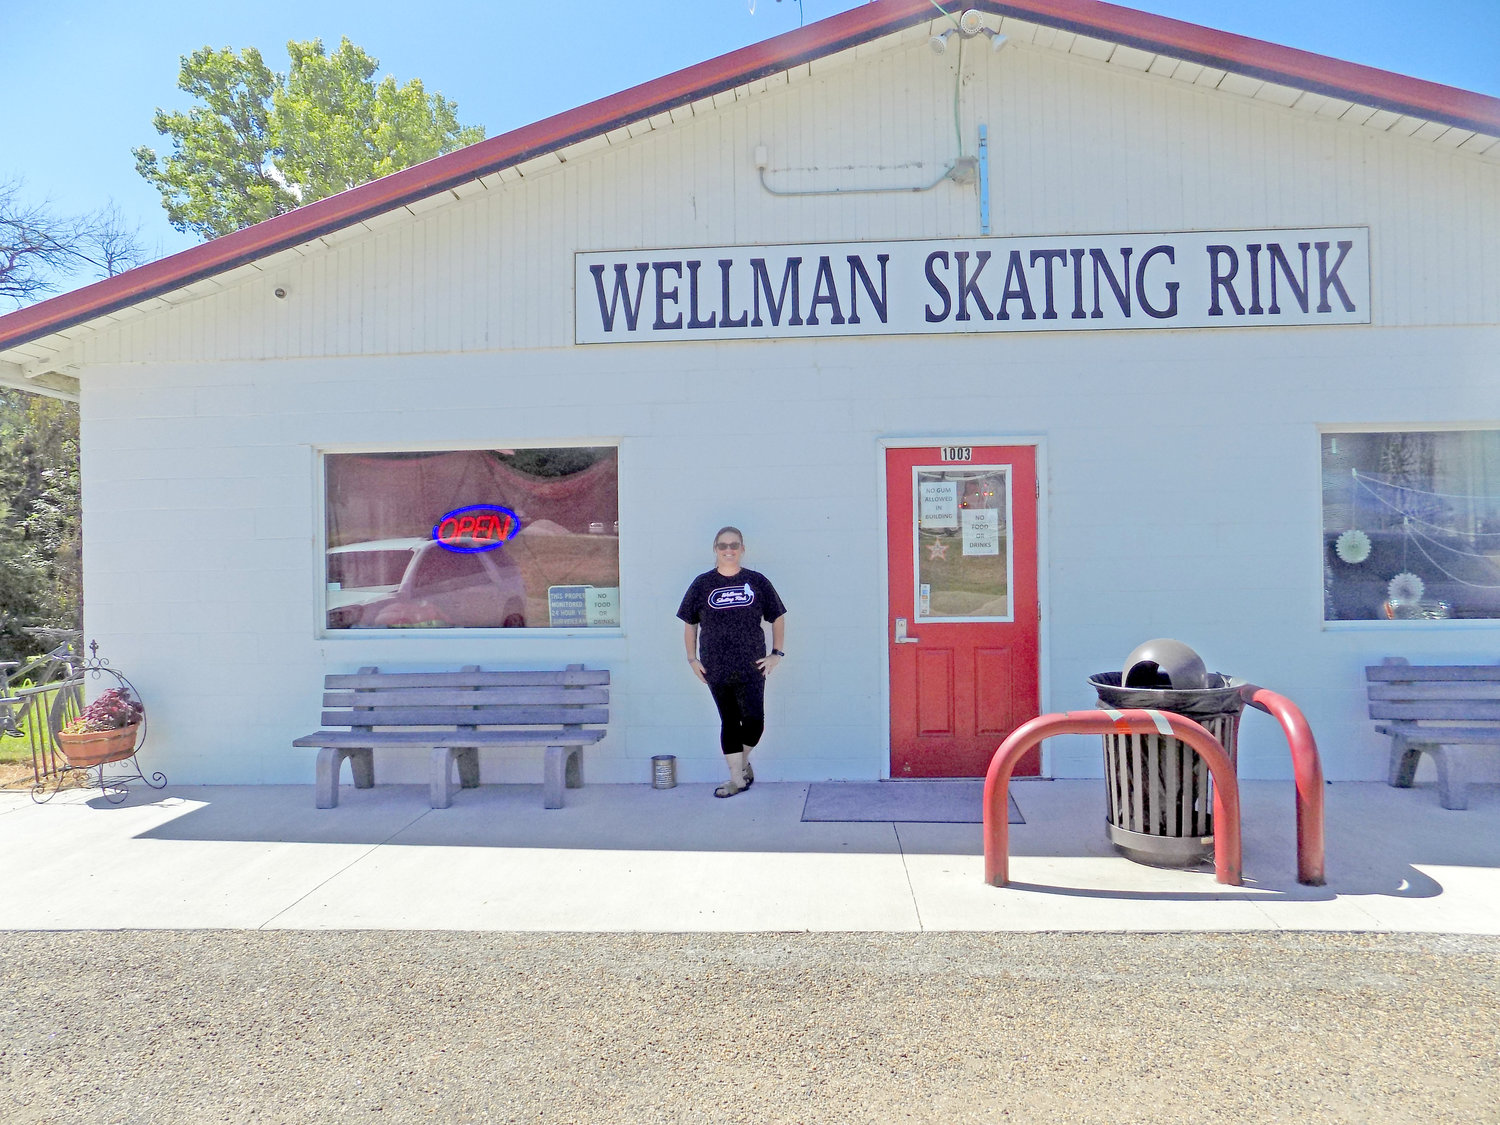 Manager Brenda Reasor wears a shirt bearing a glow-in-the-dark Wellman Skating Rink logo that she designed.